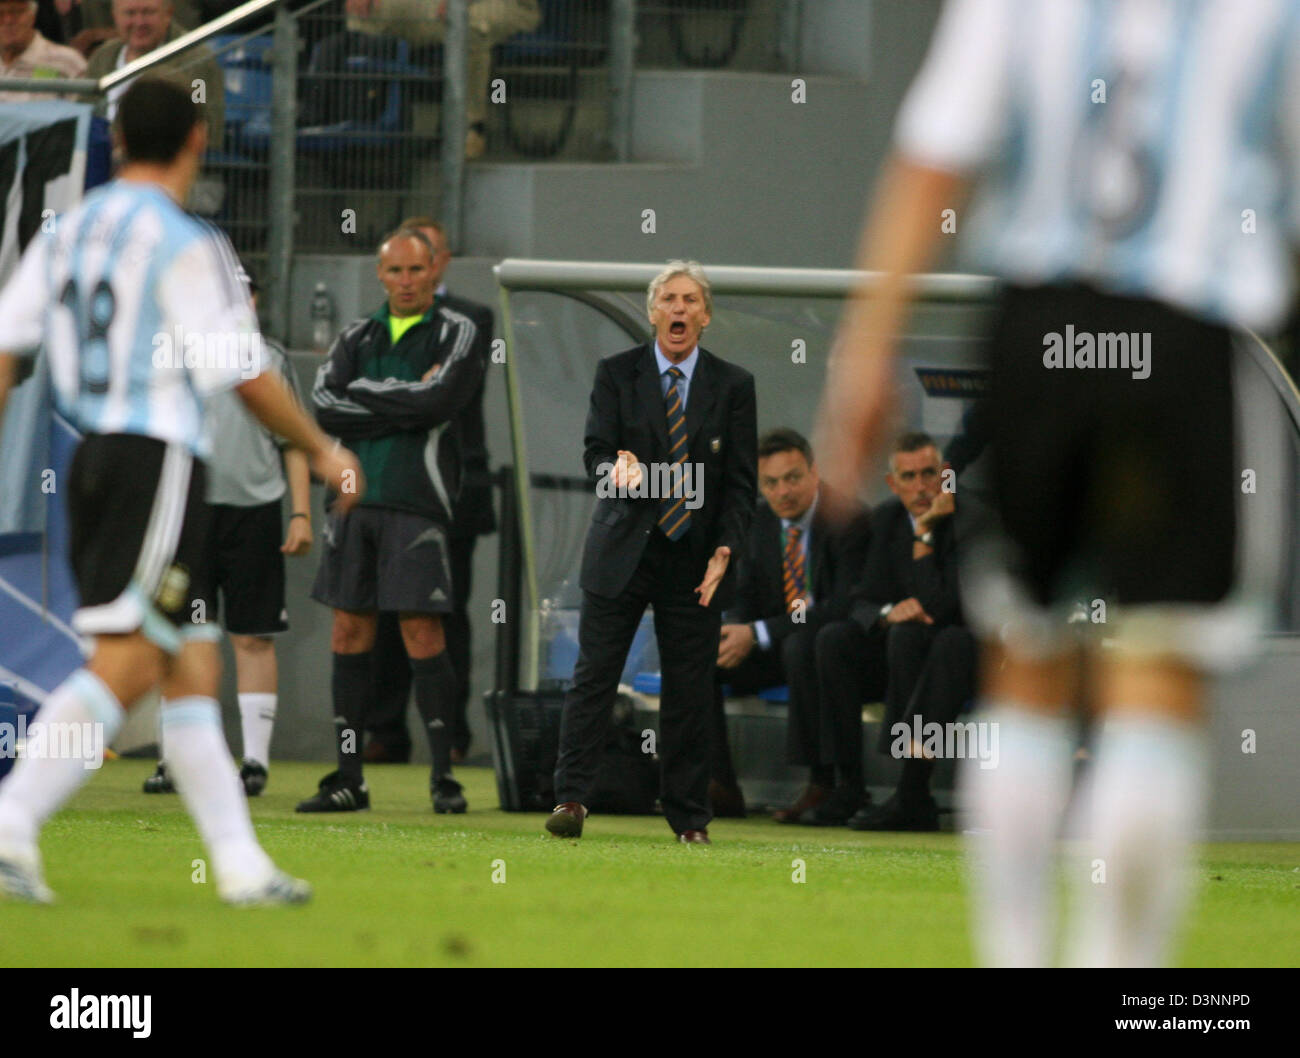 The Argentinian coach Jose Pekerman (C) shouts instructions on the sideline during the group C preliminary match of 2006 FIFA World Cup between Argentina and Ivory Coast in Hamburg, on Saturday, 10 June 2006. DPA/CARMEN JASPERSEN +++ Mobile Services OUT +++ Please also refer to FIFA's Terms and Conditions. +++(c) dpa - Bildfunk+++ Stock Photo